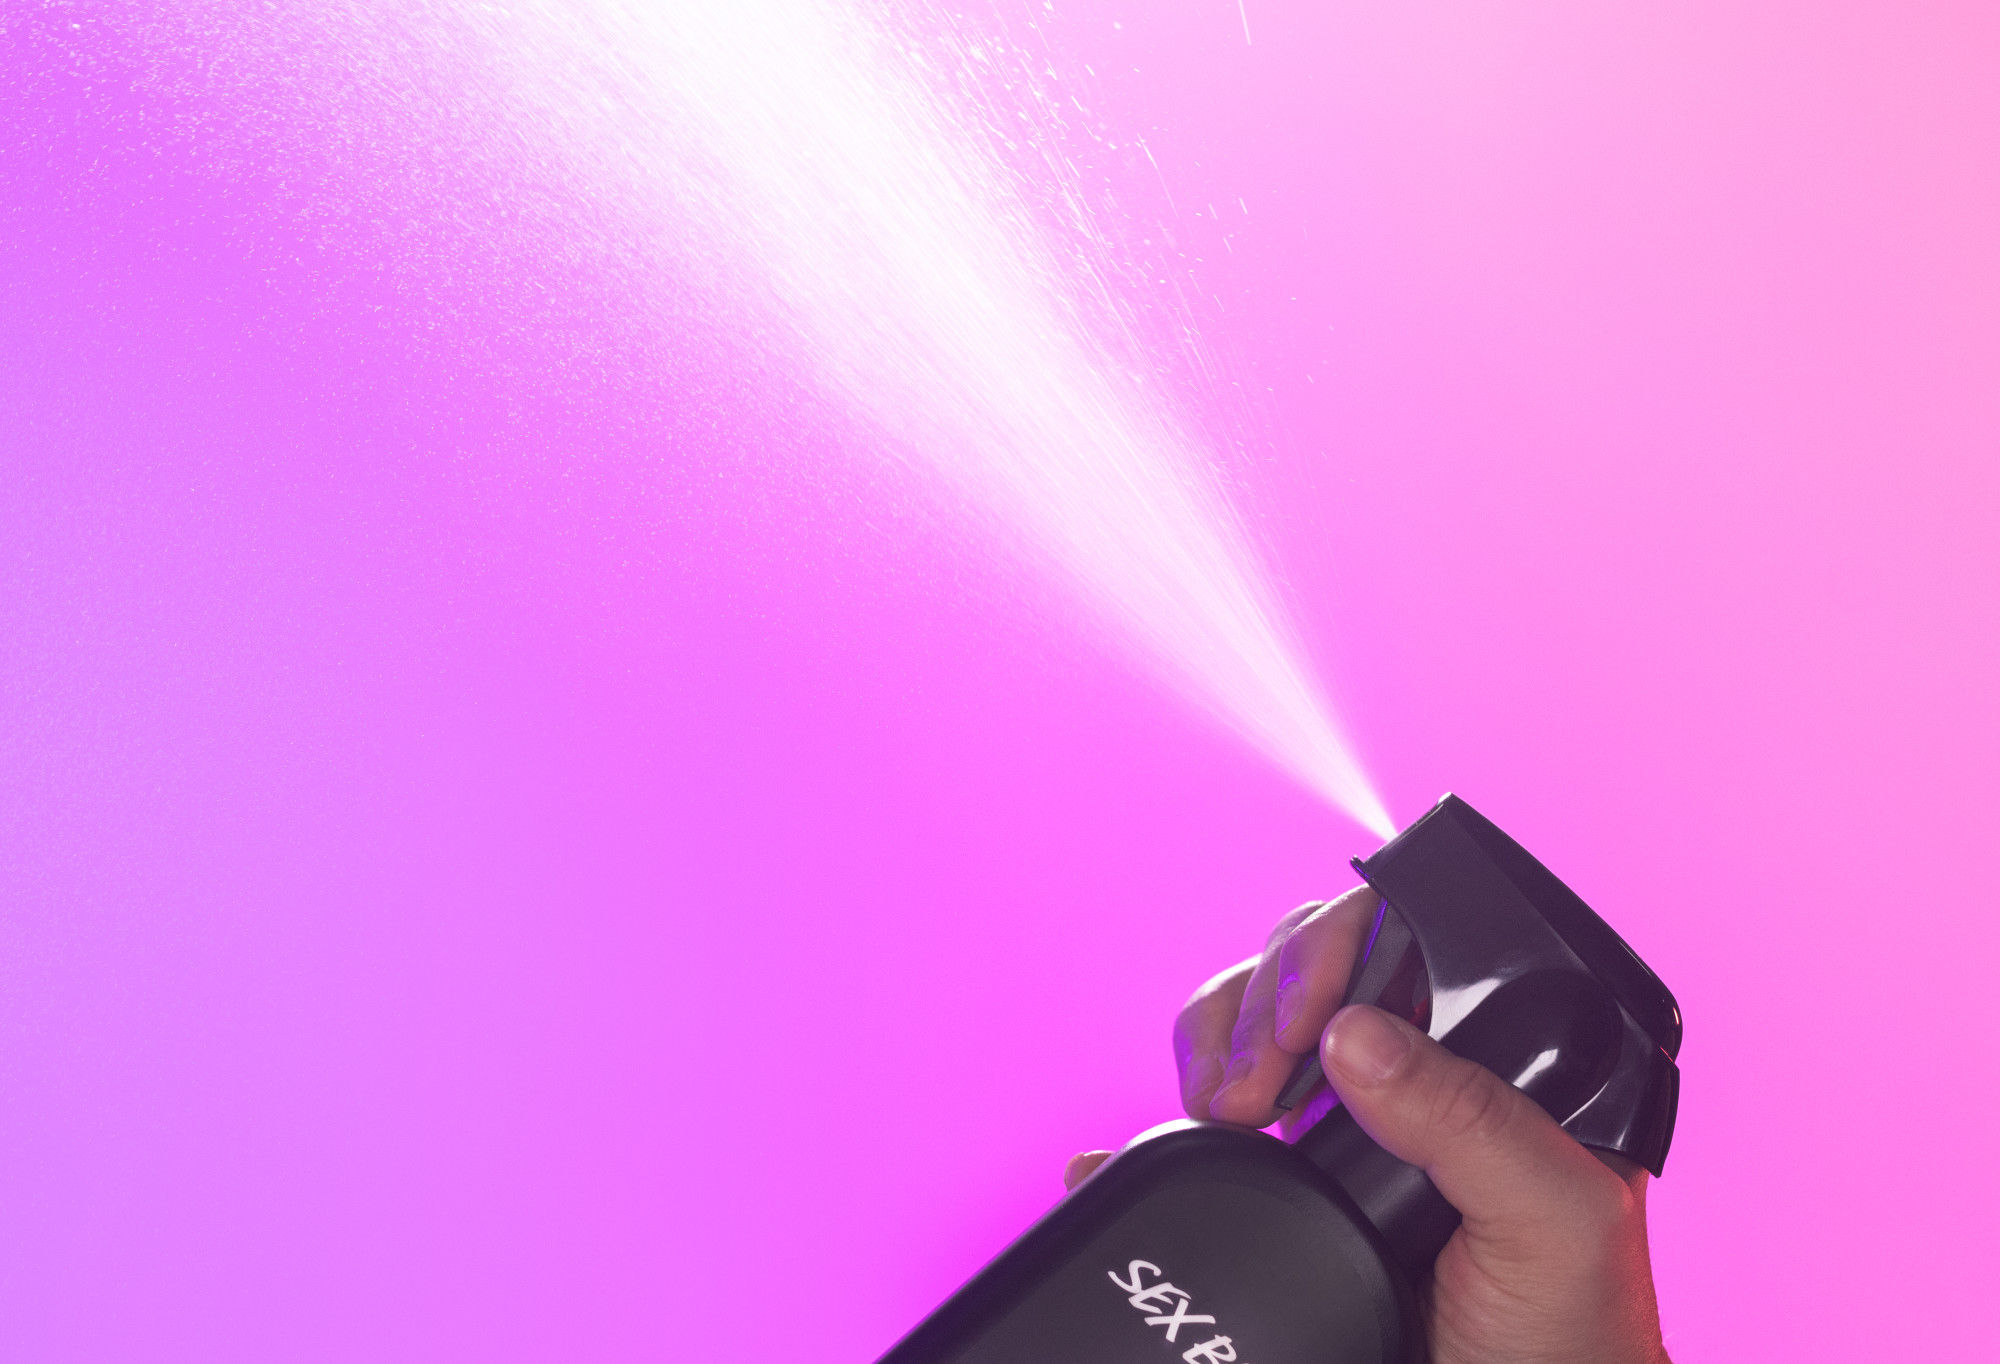 Sex Bomb body spray is sprayed up into the air, in front of a vibrant, purple to pink gradient background.